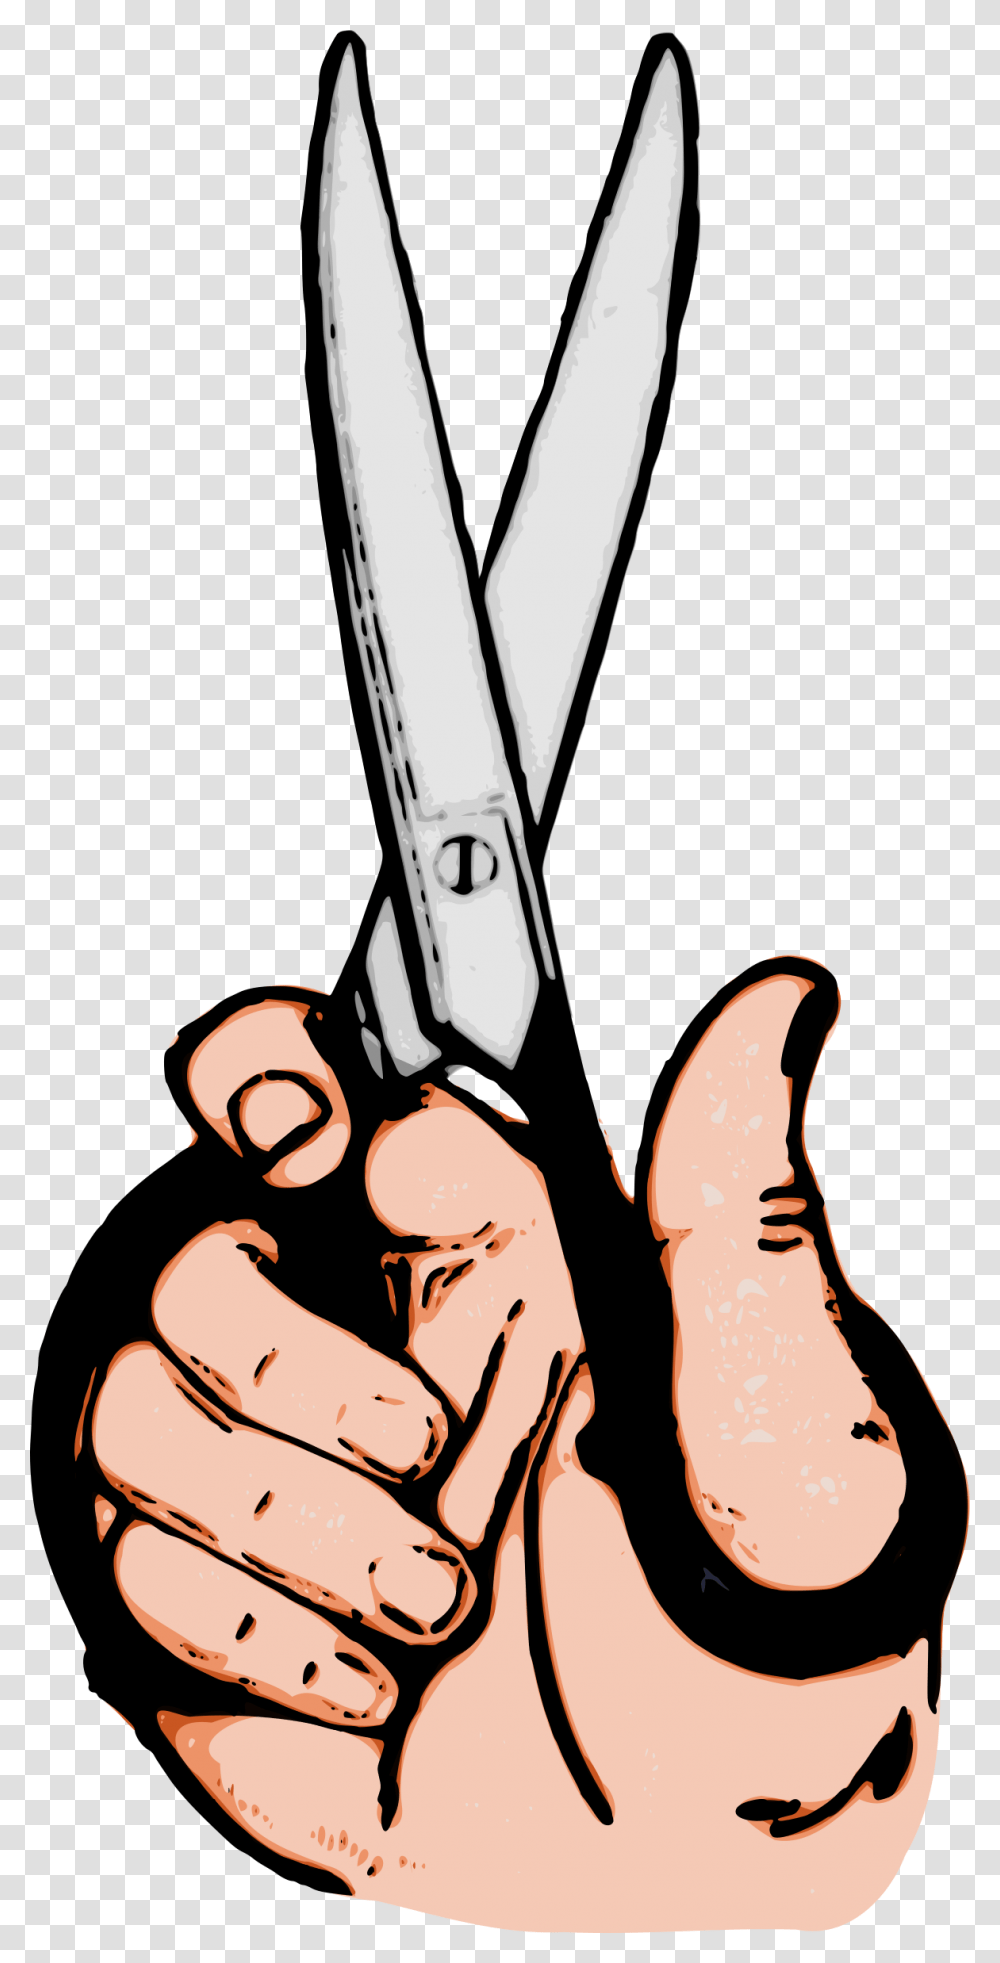 Scissors And Hand Clip Arts Hand Scissors Line Art, Weapon, Weaponry, Blade, Shears Transparent Png